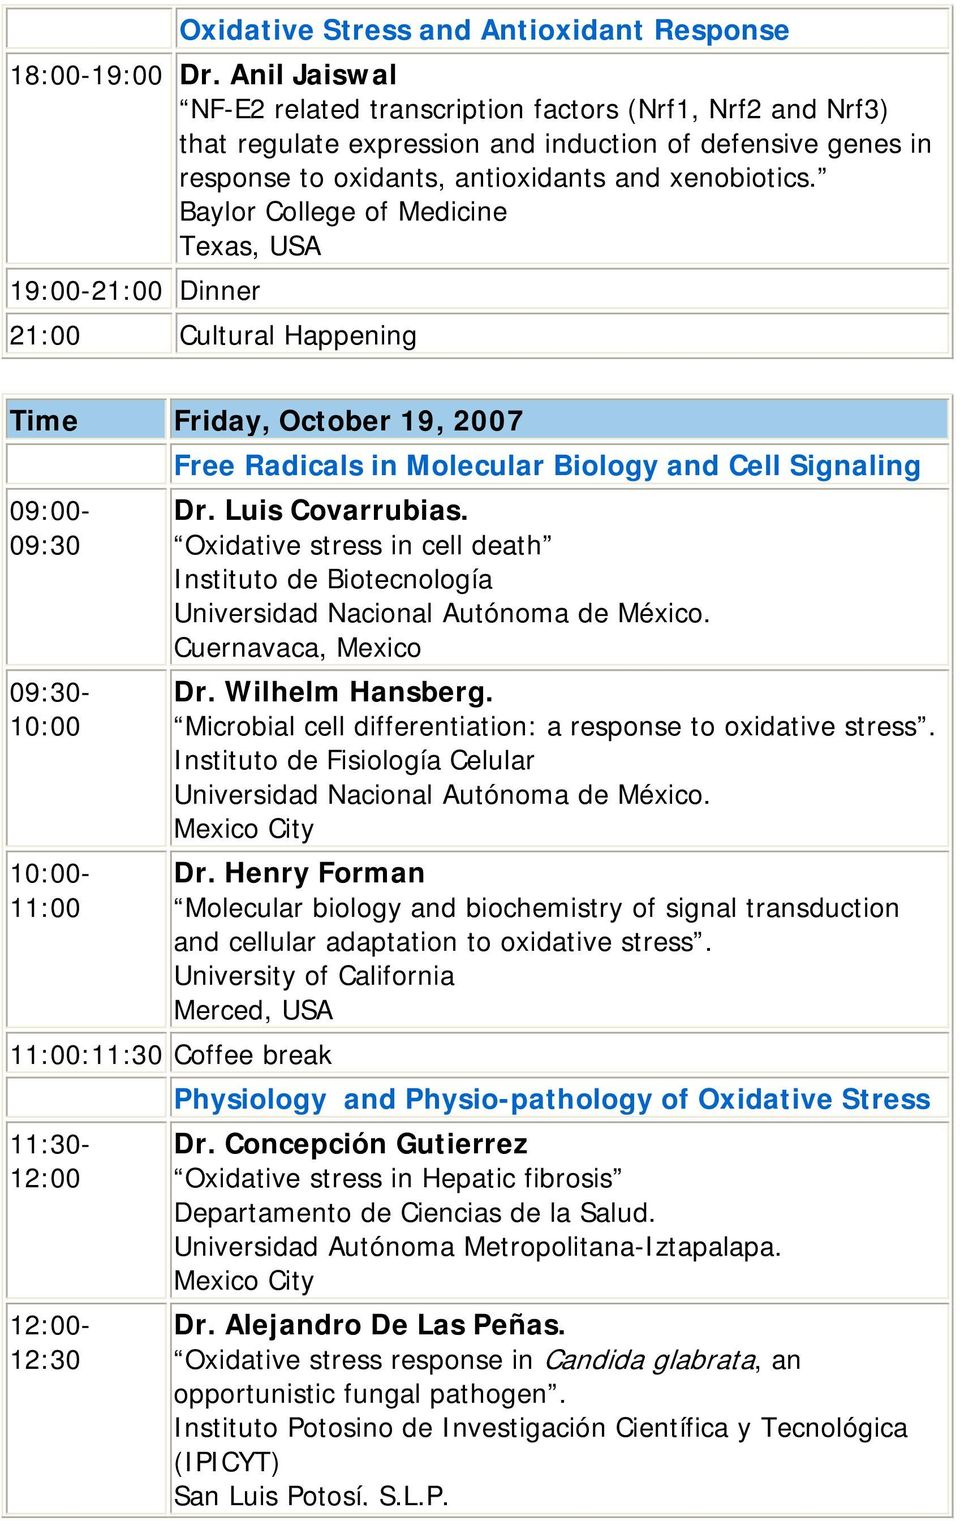 Baylor College of Medicine Texas, USA 19:00-21:00 Dinner 21:00 Cultural Happening Time Friday, October 19, 2007 09:00-09:30 09:30-10:00 10:00-11:00 Free Radicals in Molecular Biology and Cell